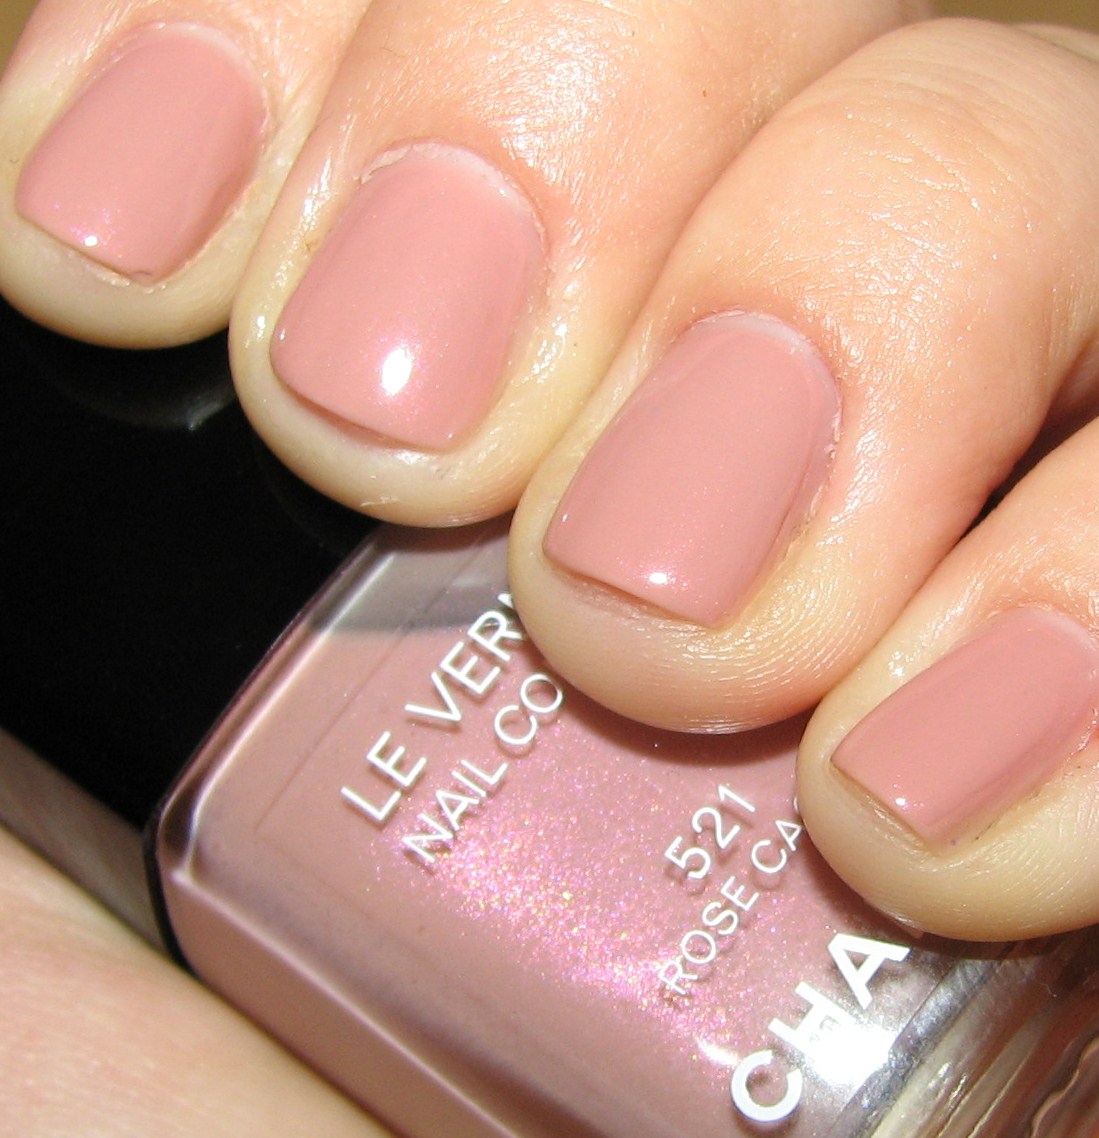 Chanel ROSE CACHE Le Vernis Nail Swatches and Review - Blushing Noir